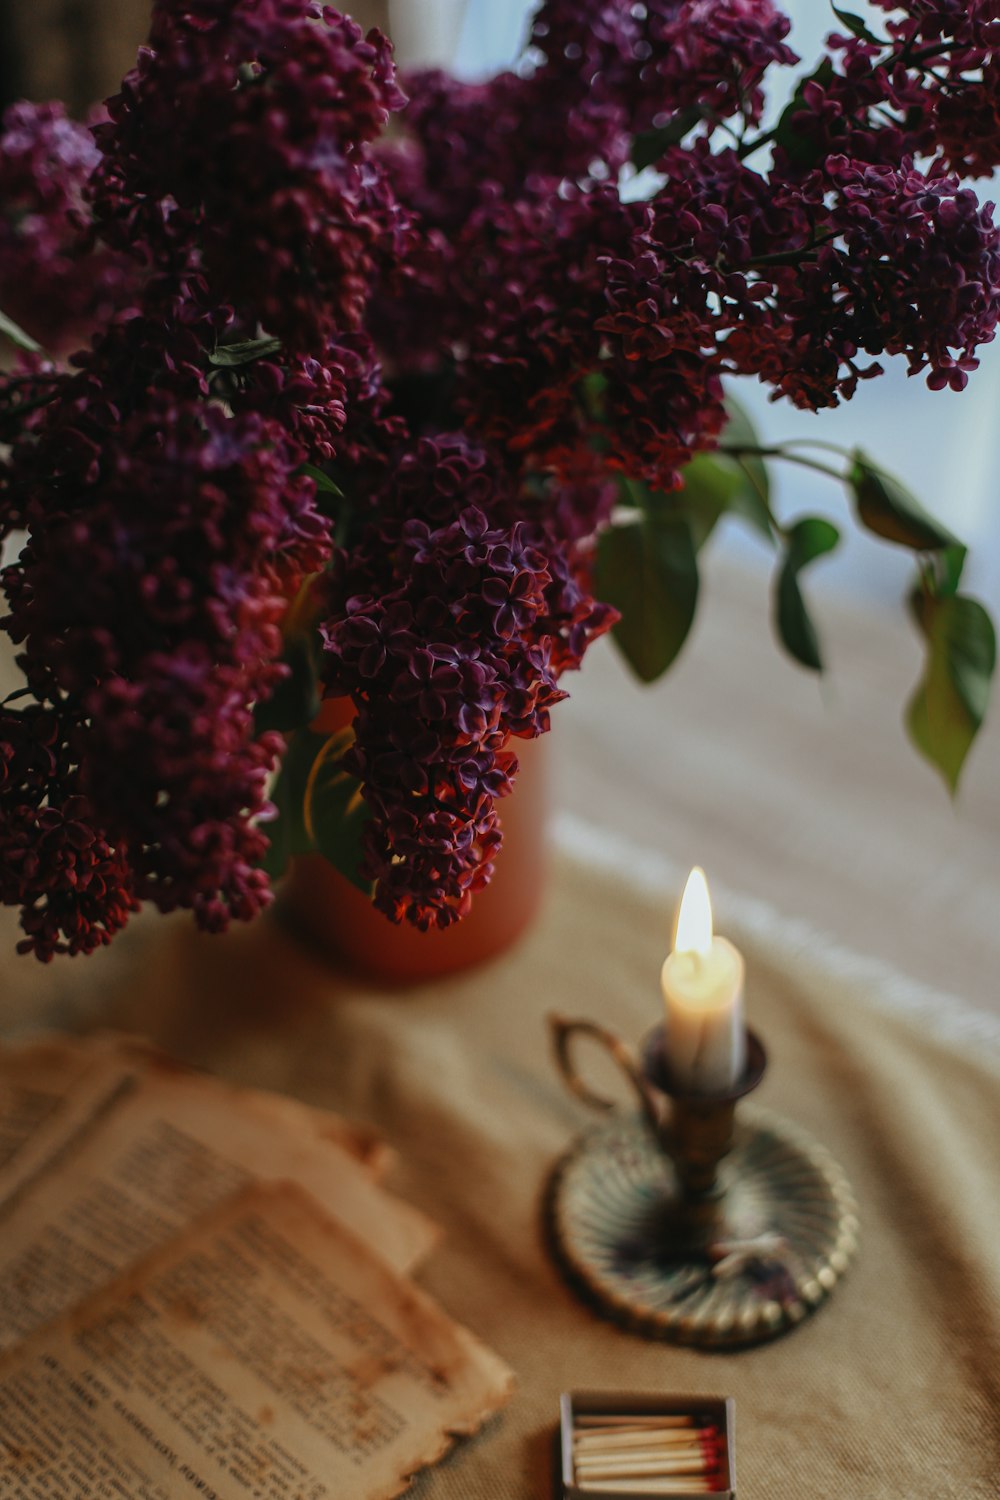 a candle next to a potted plant with purple flowers